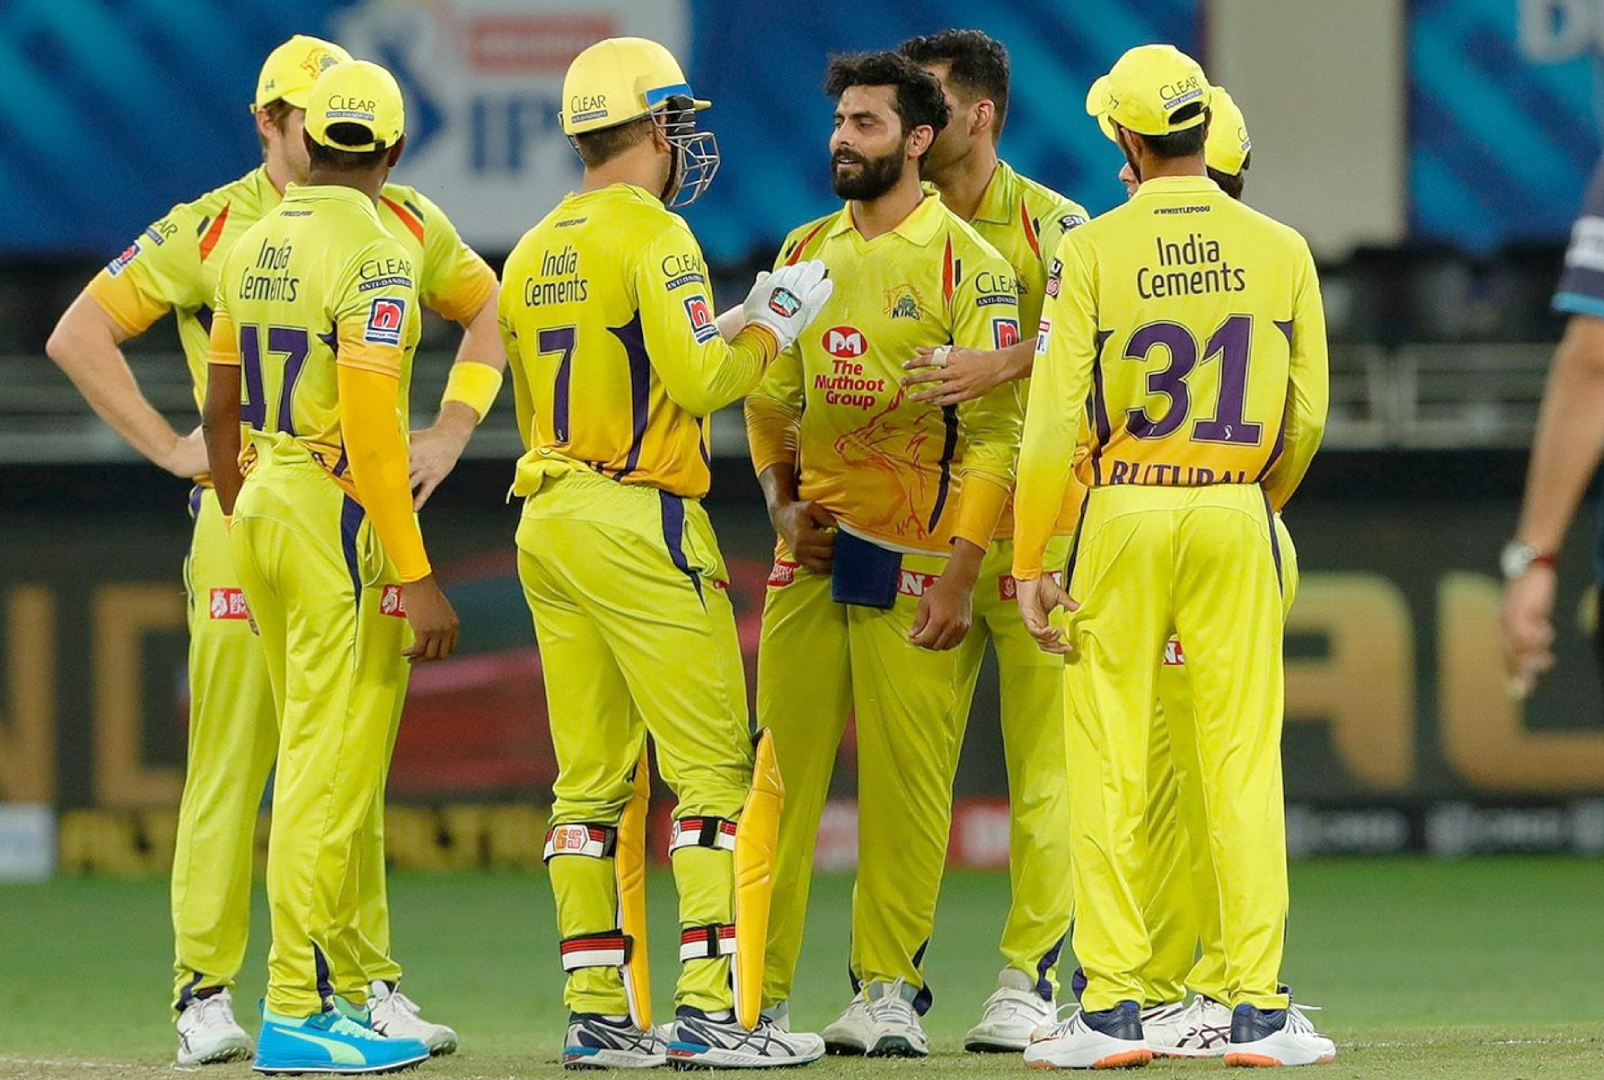 CSK Harbhajan Singh Speaks About His Decision And IPL 2020